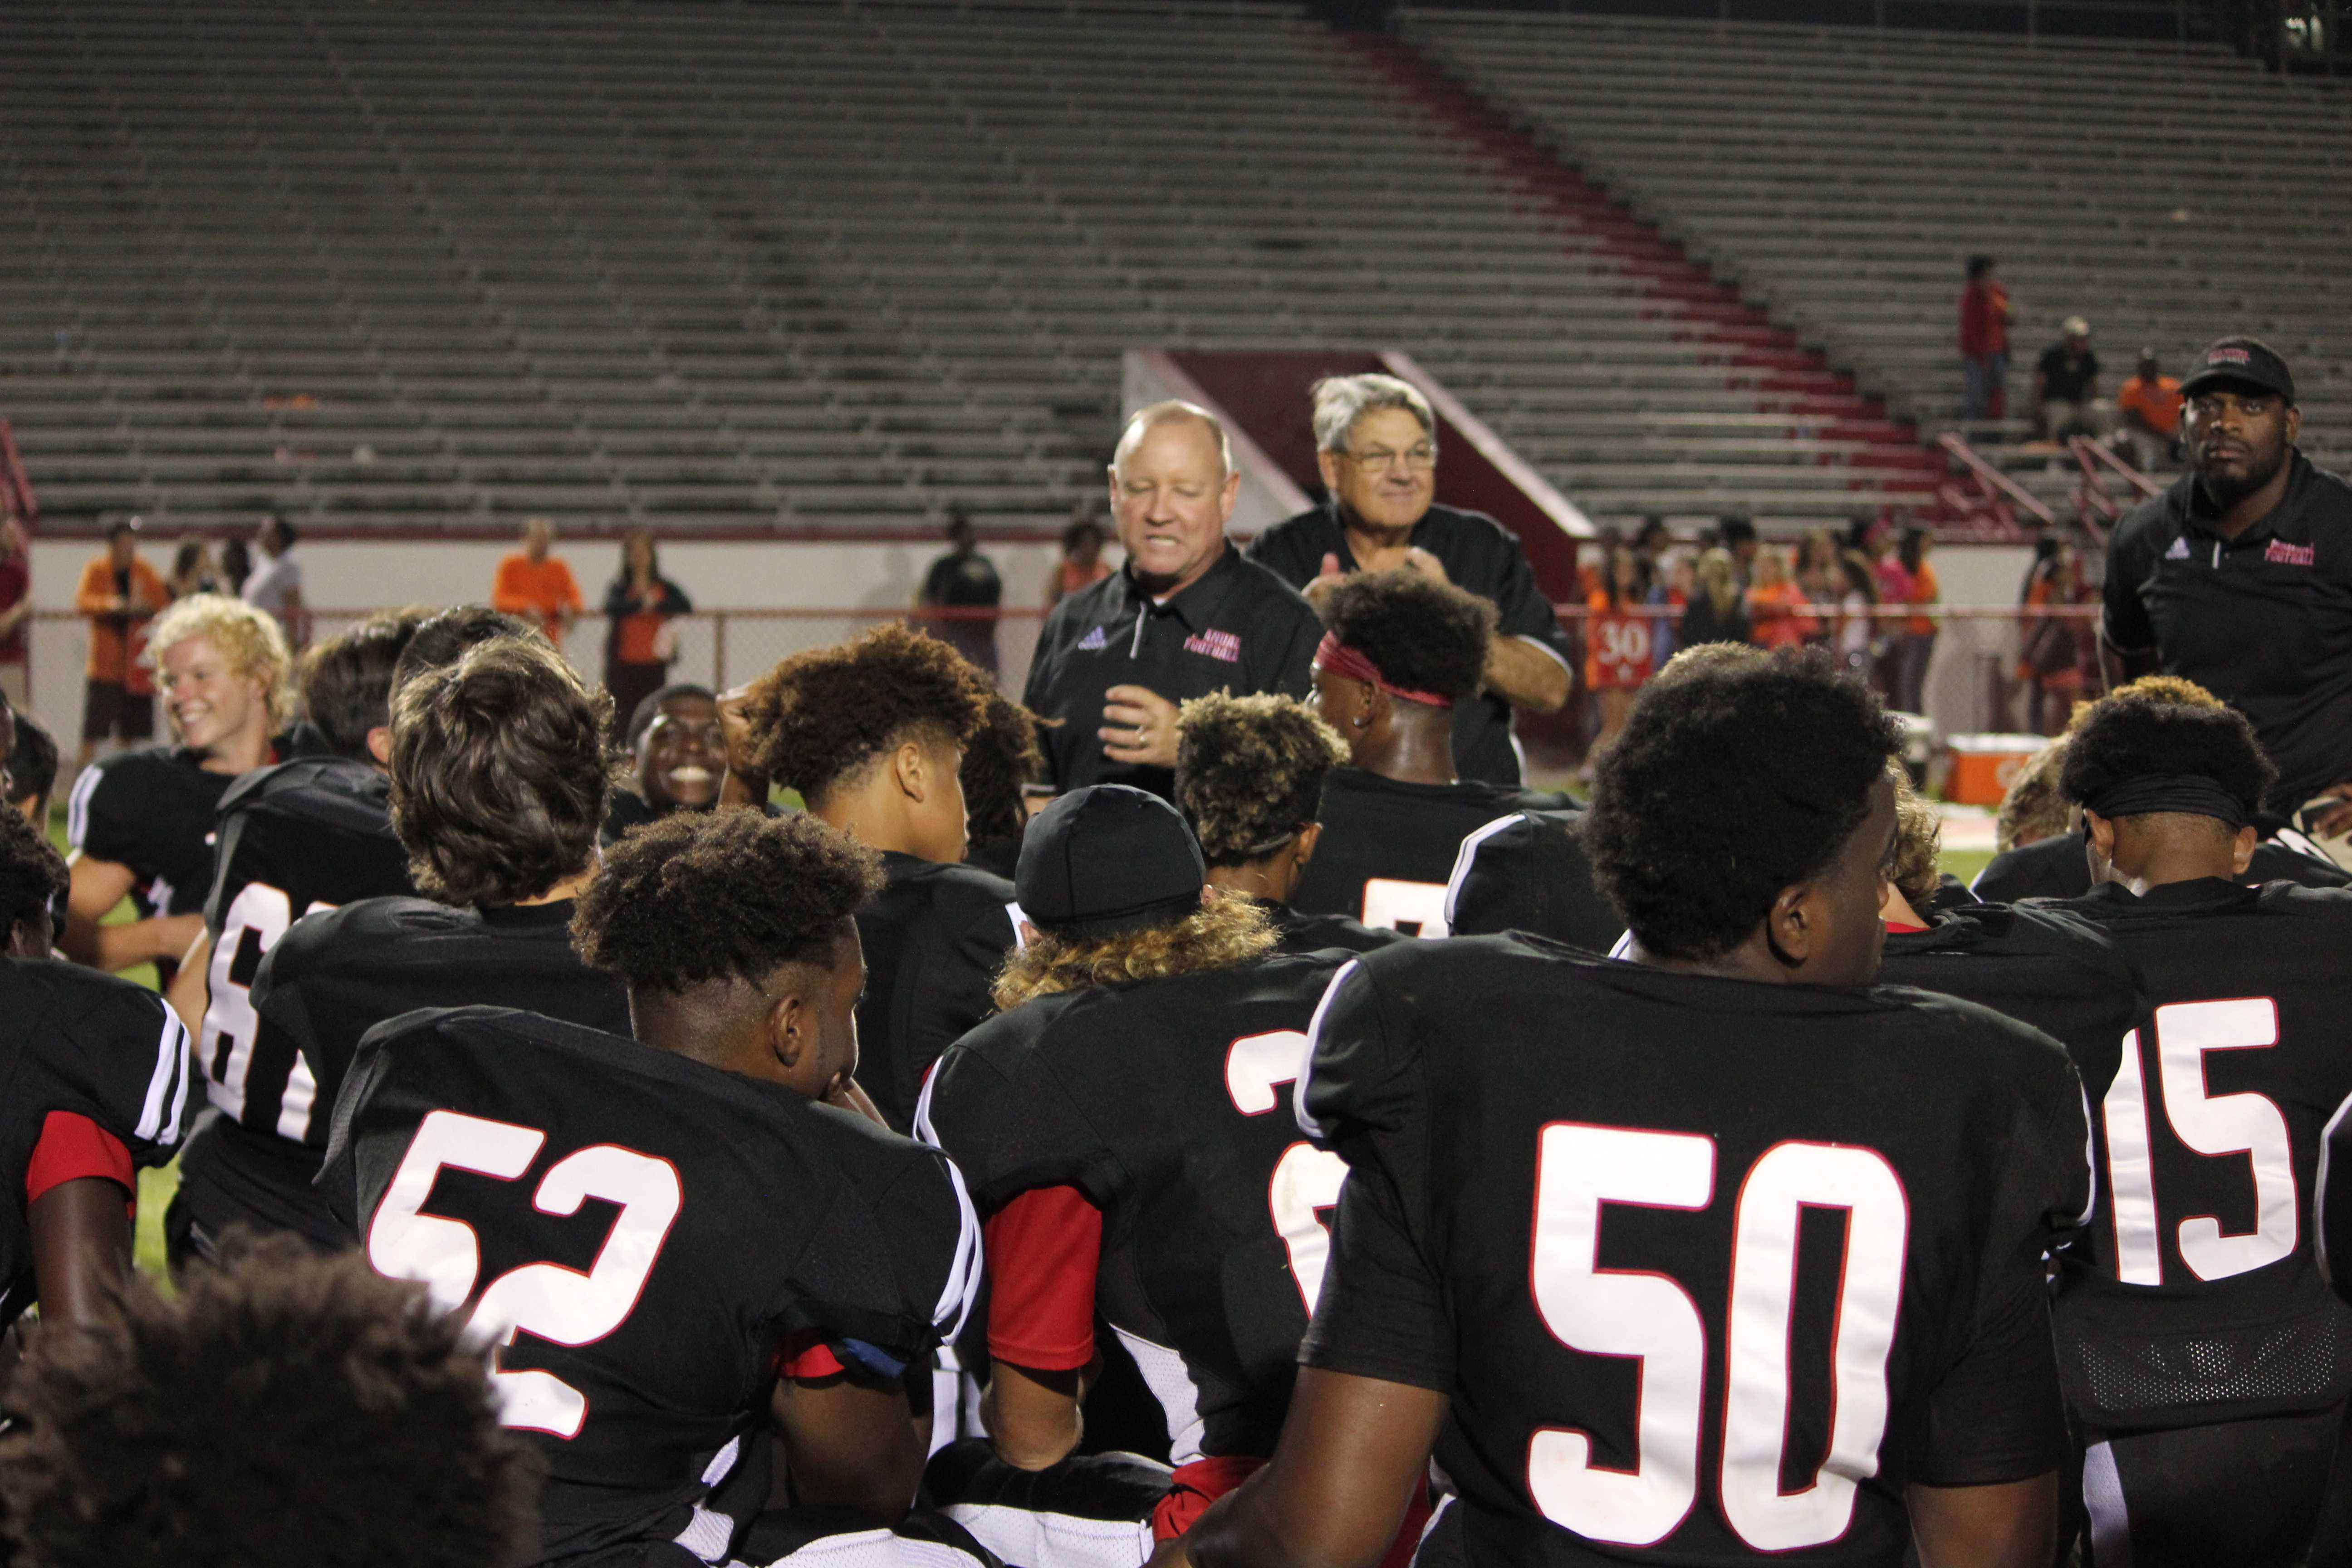 Manual head coach, Scott Carmony, talks to the team after the game. “After a game like this, we’re feeling really good,” Carmony said. Photo by EP Presnell.